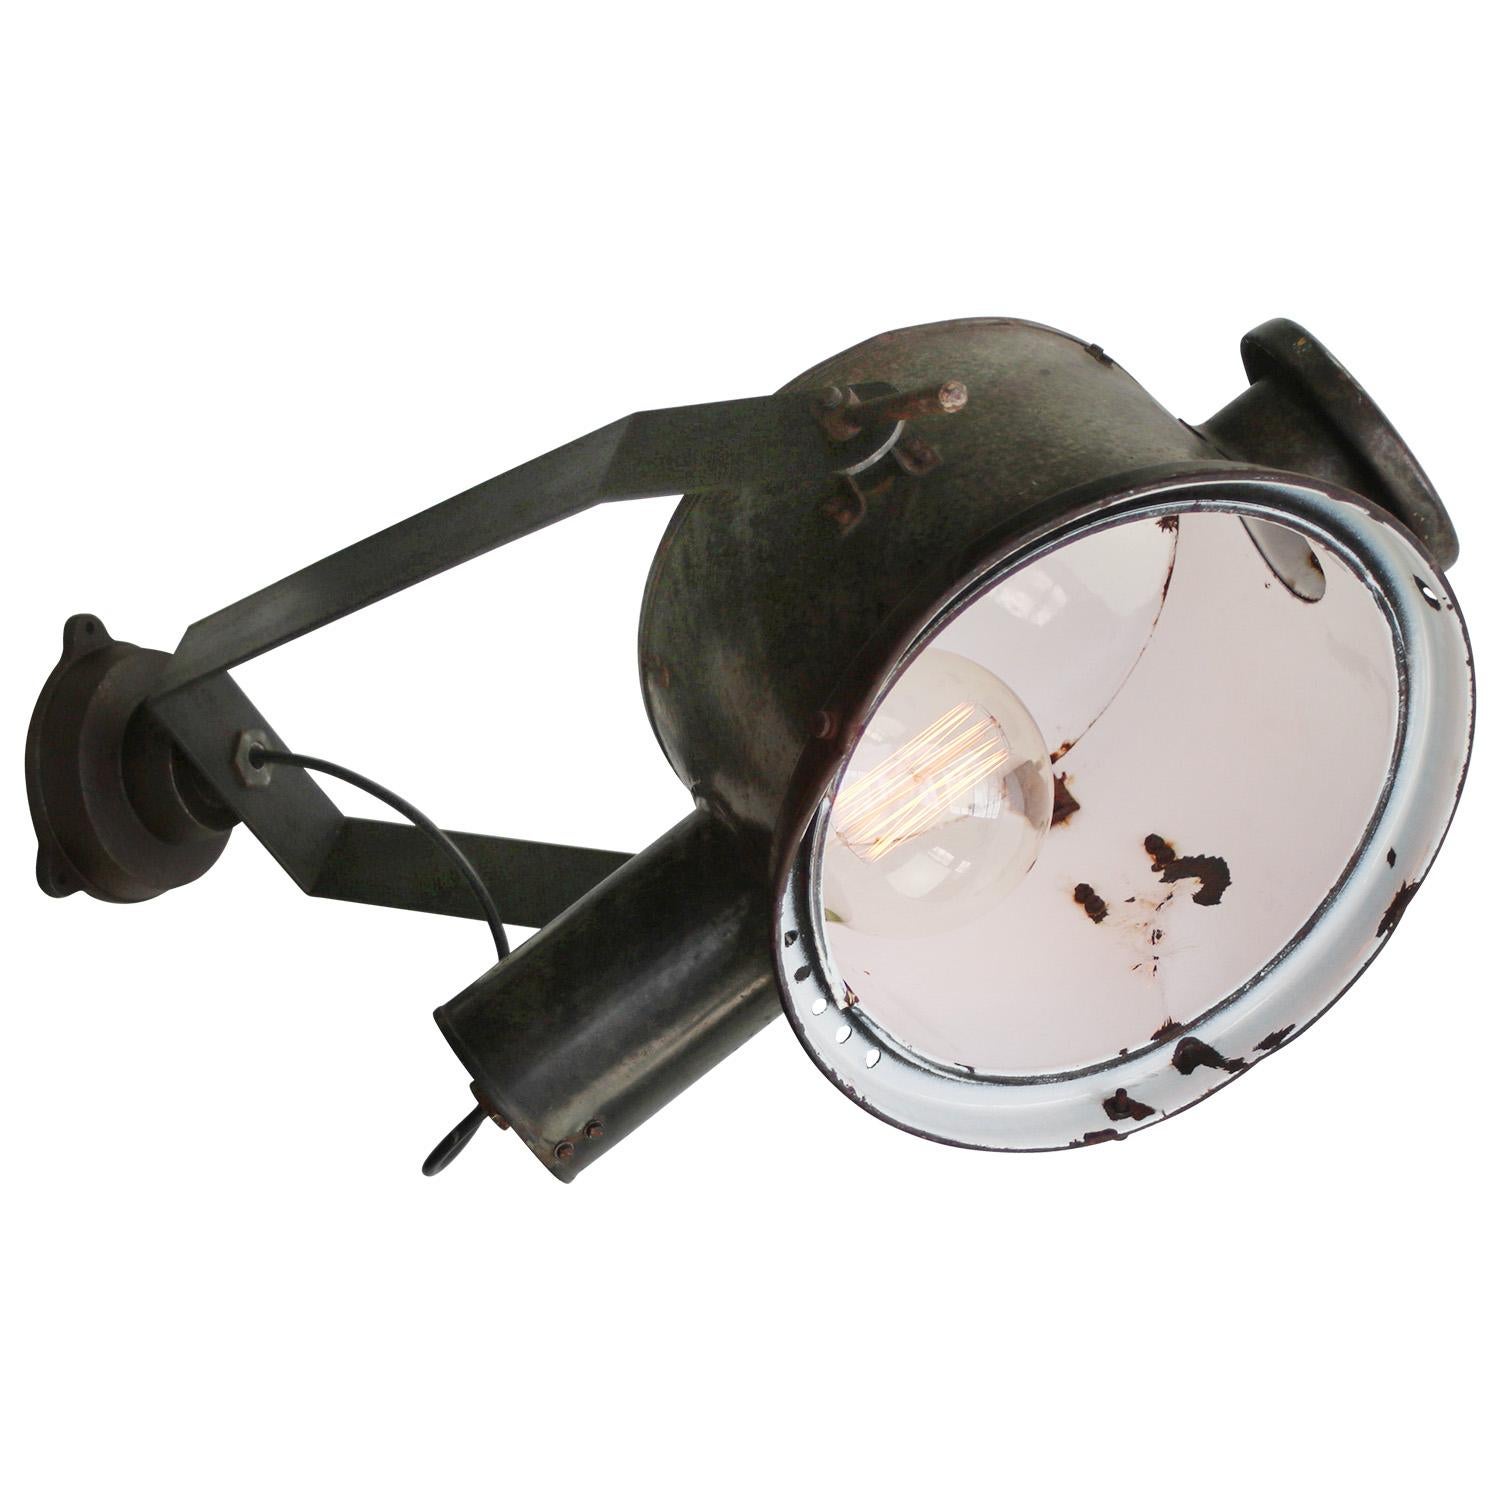 Adjustable industrial wall light
Grey brown aged enamel, cast iron parts and wall piece

Diameter wall mount 12 cm

Weight: 6.20 kg / 13.7 lb

Priced per individual item. All lamps have been made suitable by international standards for incandescent